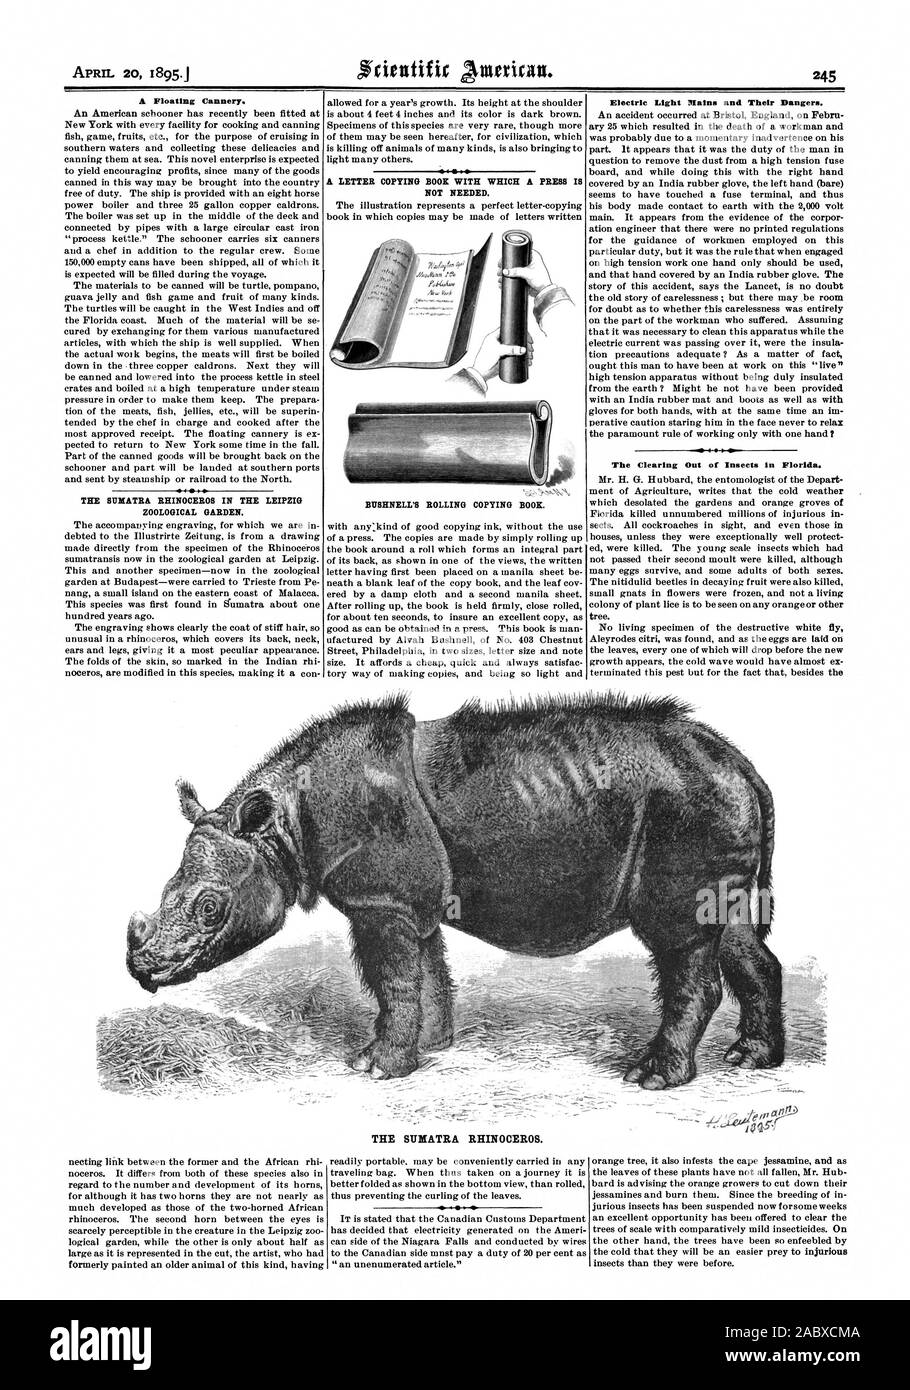 A Floating Cannery. THE SUMATRA RHINOCEROS IN THE LEIPZIG ZOOLOGICAL GARDEN. NOT NEEDED. BUSHNELL'S ROLLING COPYING BOOK. Electric Light Mains and Their Dangers. The Clearing Out of Insects in Florida. THE SUMATRA RHINOCEROS., scientific american, 1895-04-20 Stock Photo